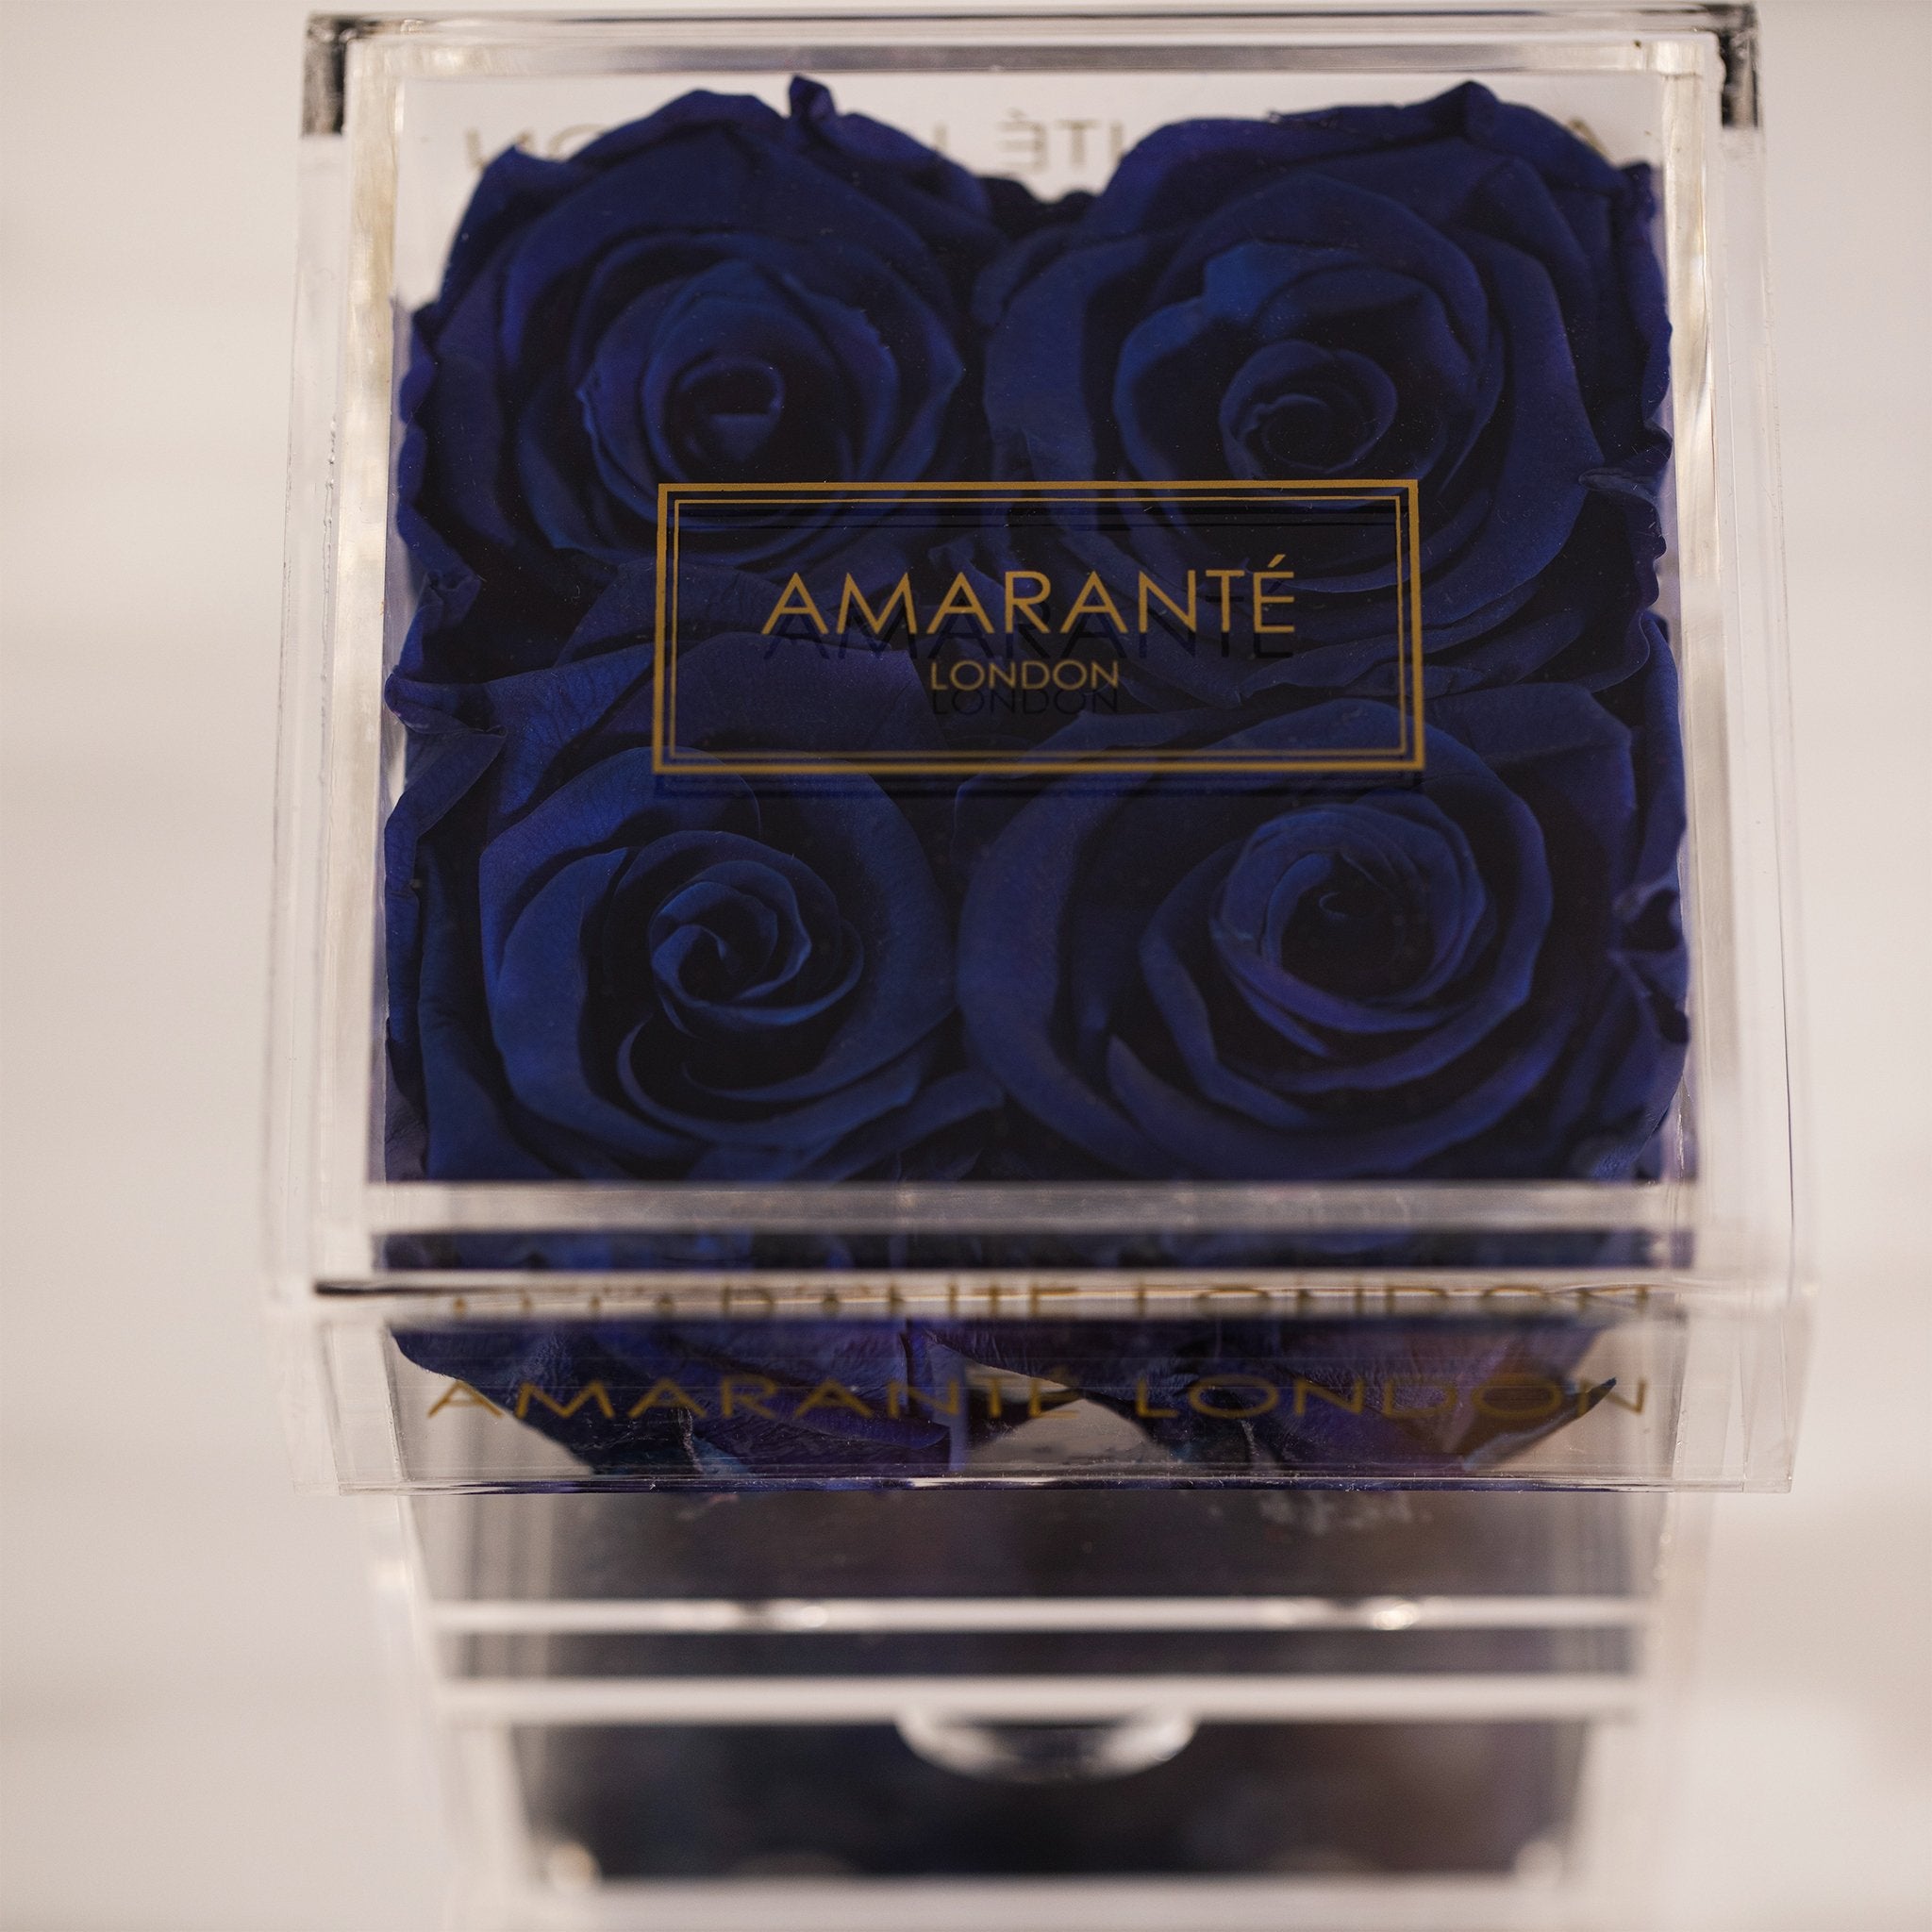 Luxurious royal blue roses encompassed in a stylish box 